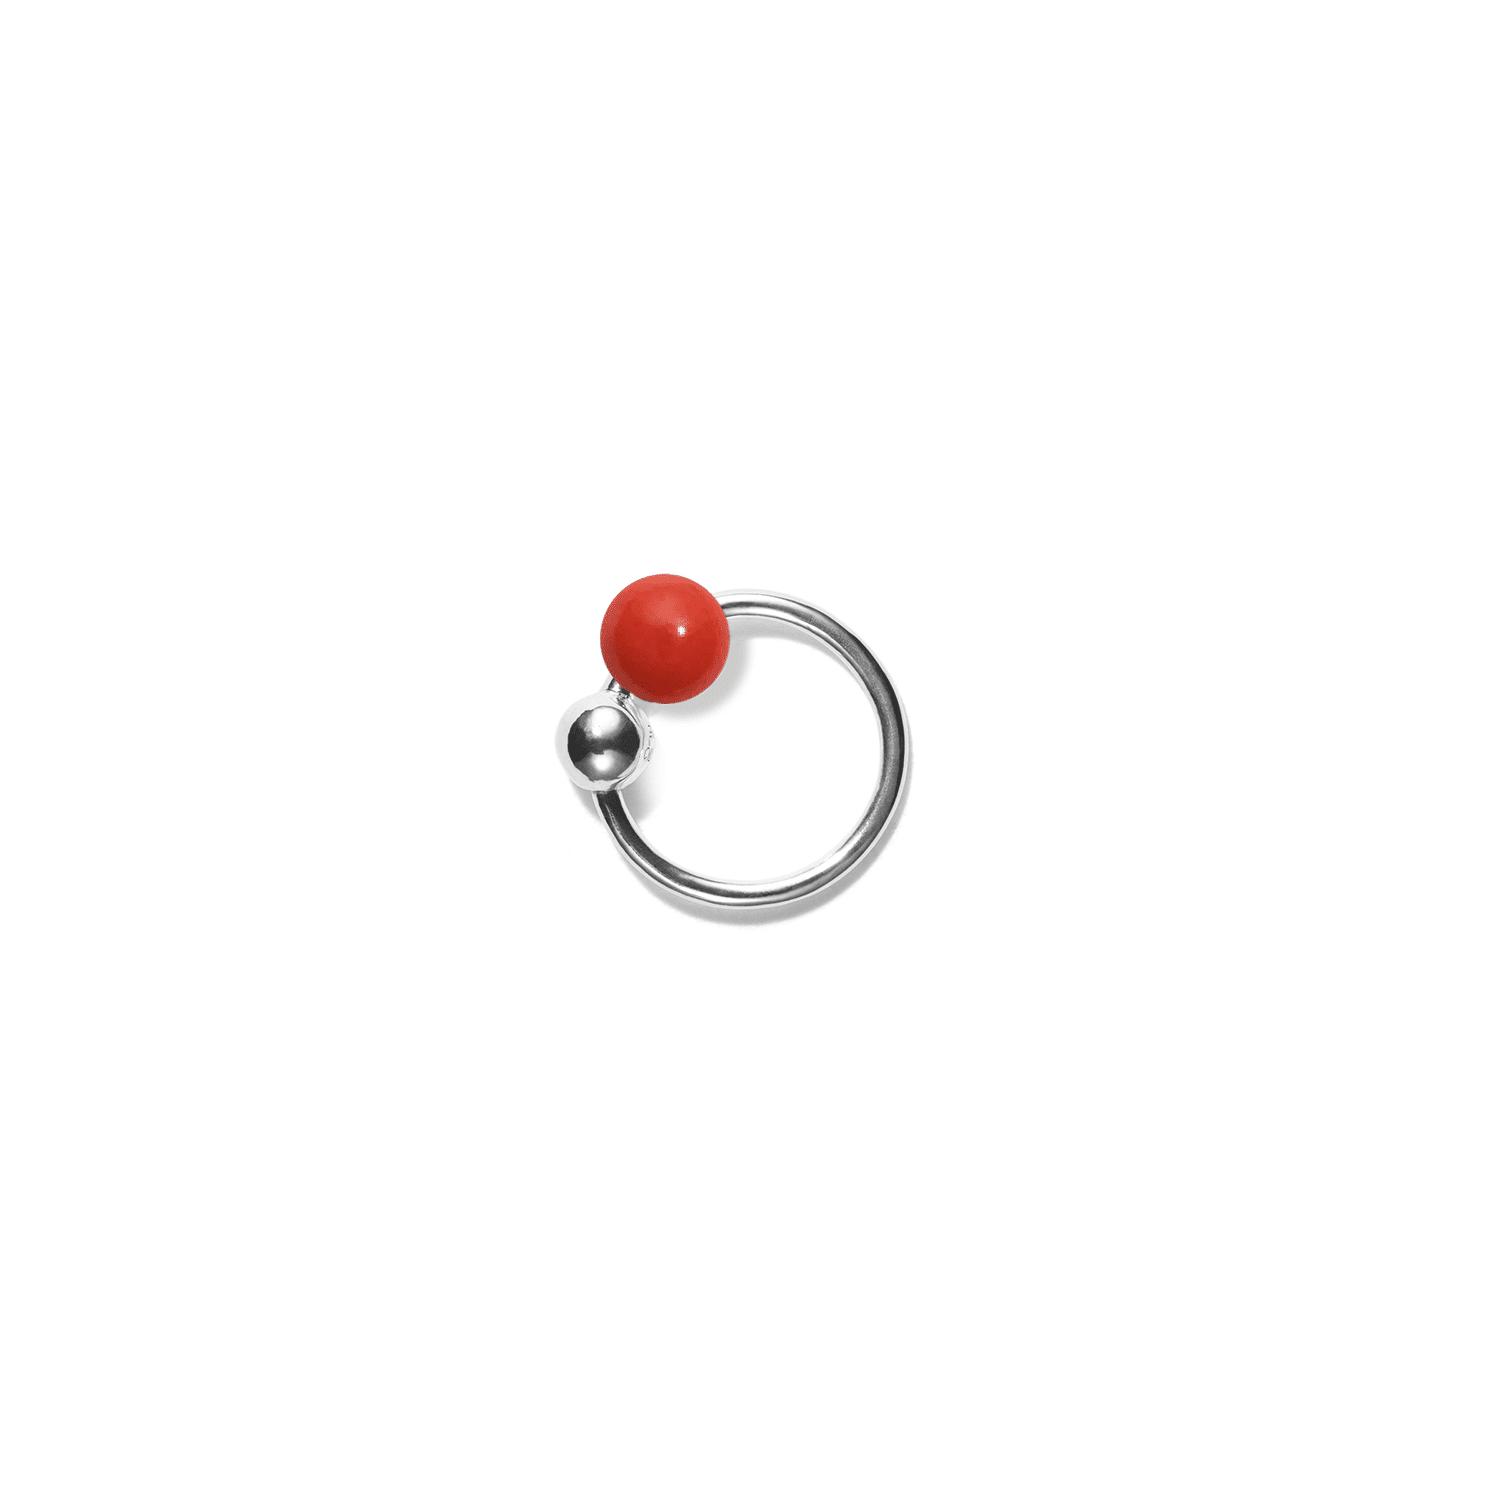 ELLY ONE high polished sterling silver earring with red coral bead